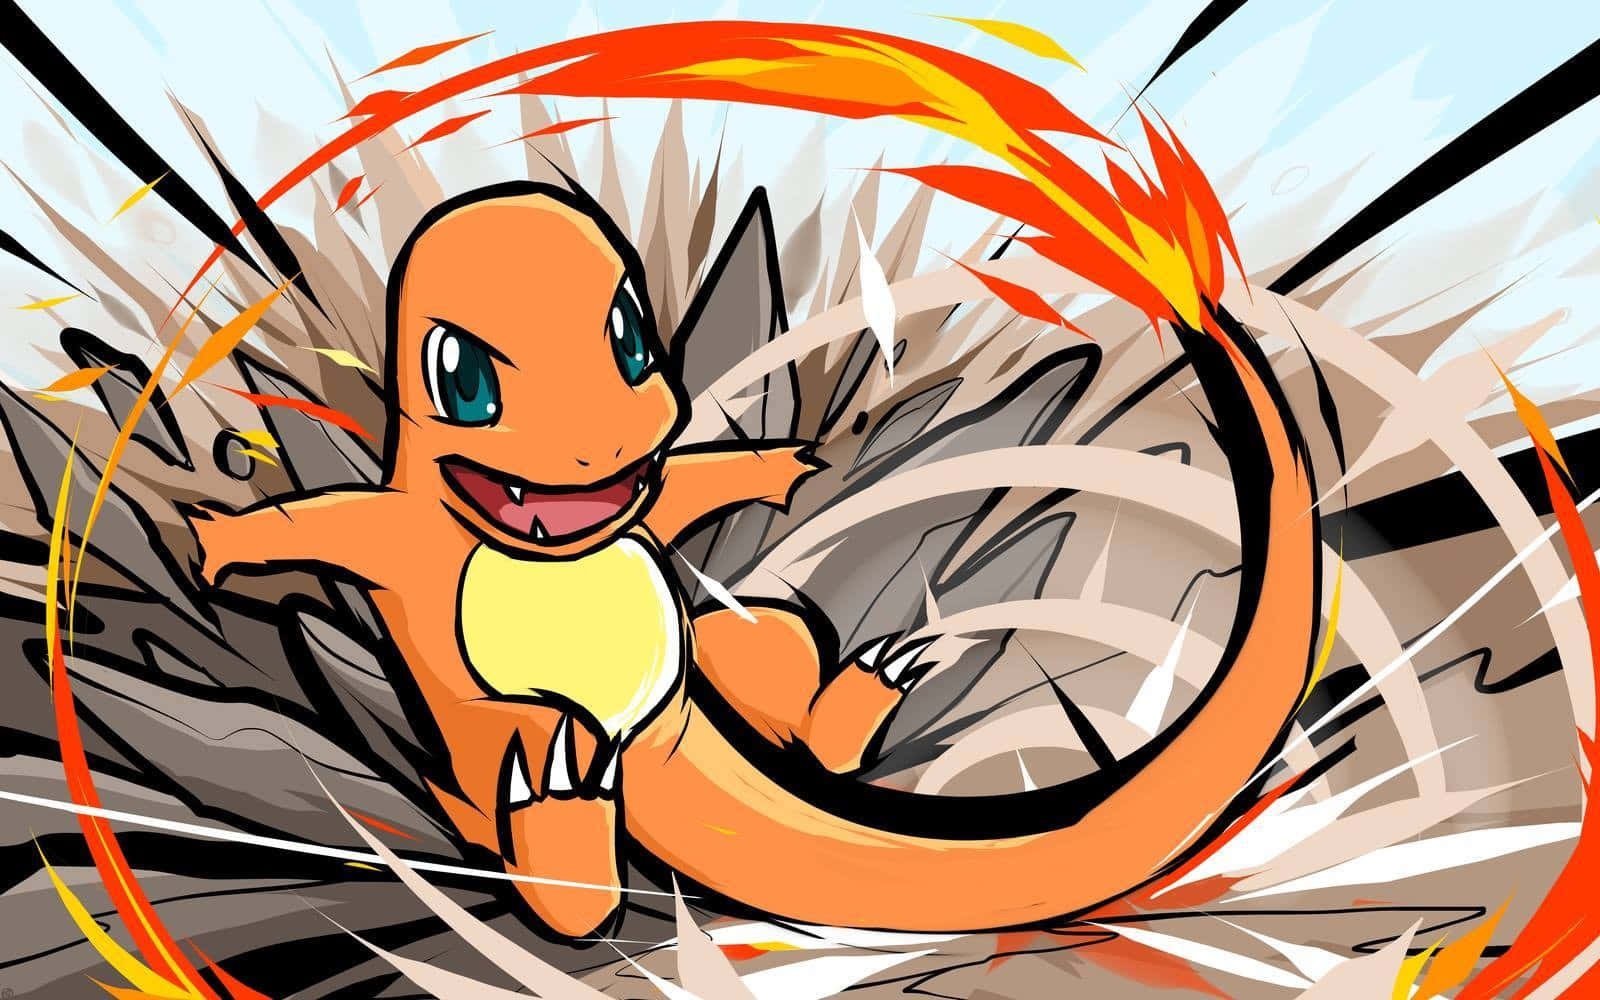 "Cuteness Overload! Adorable Charmander is Here To Bring You Joy." Wallpaper